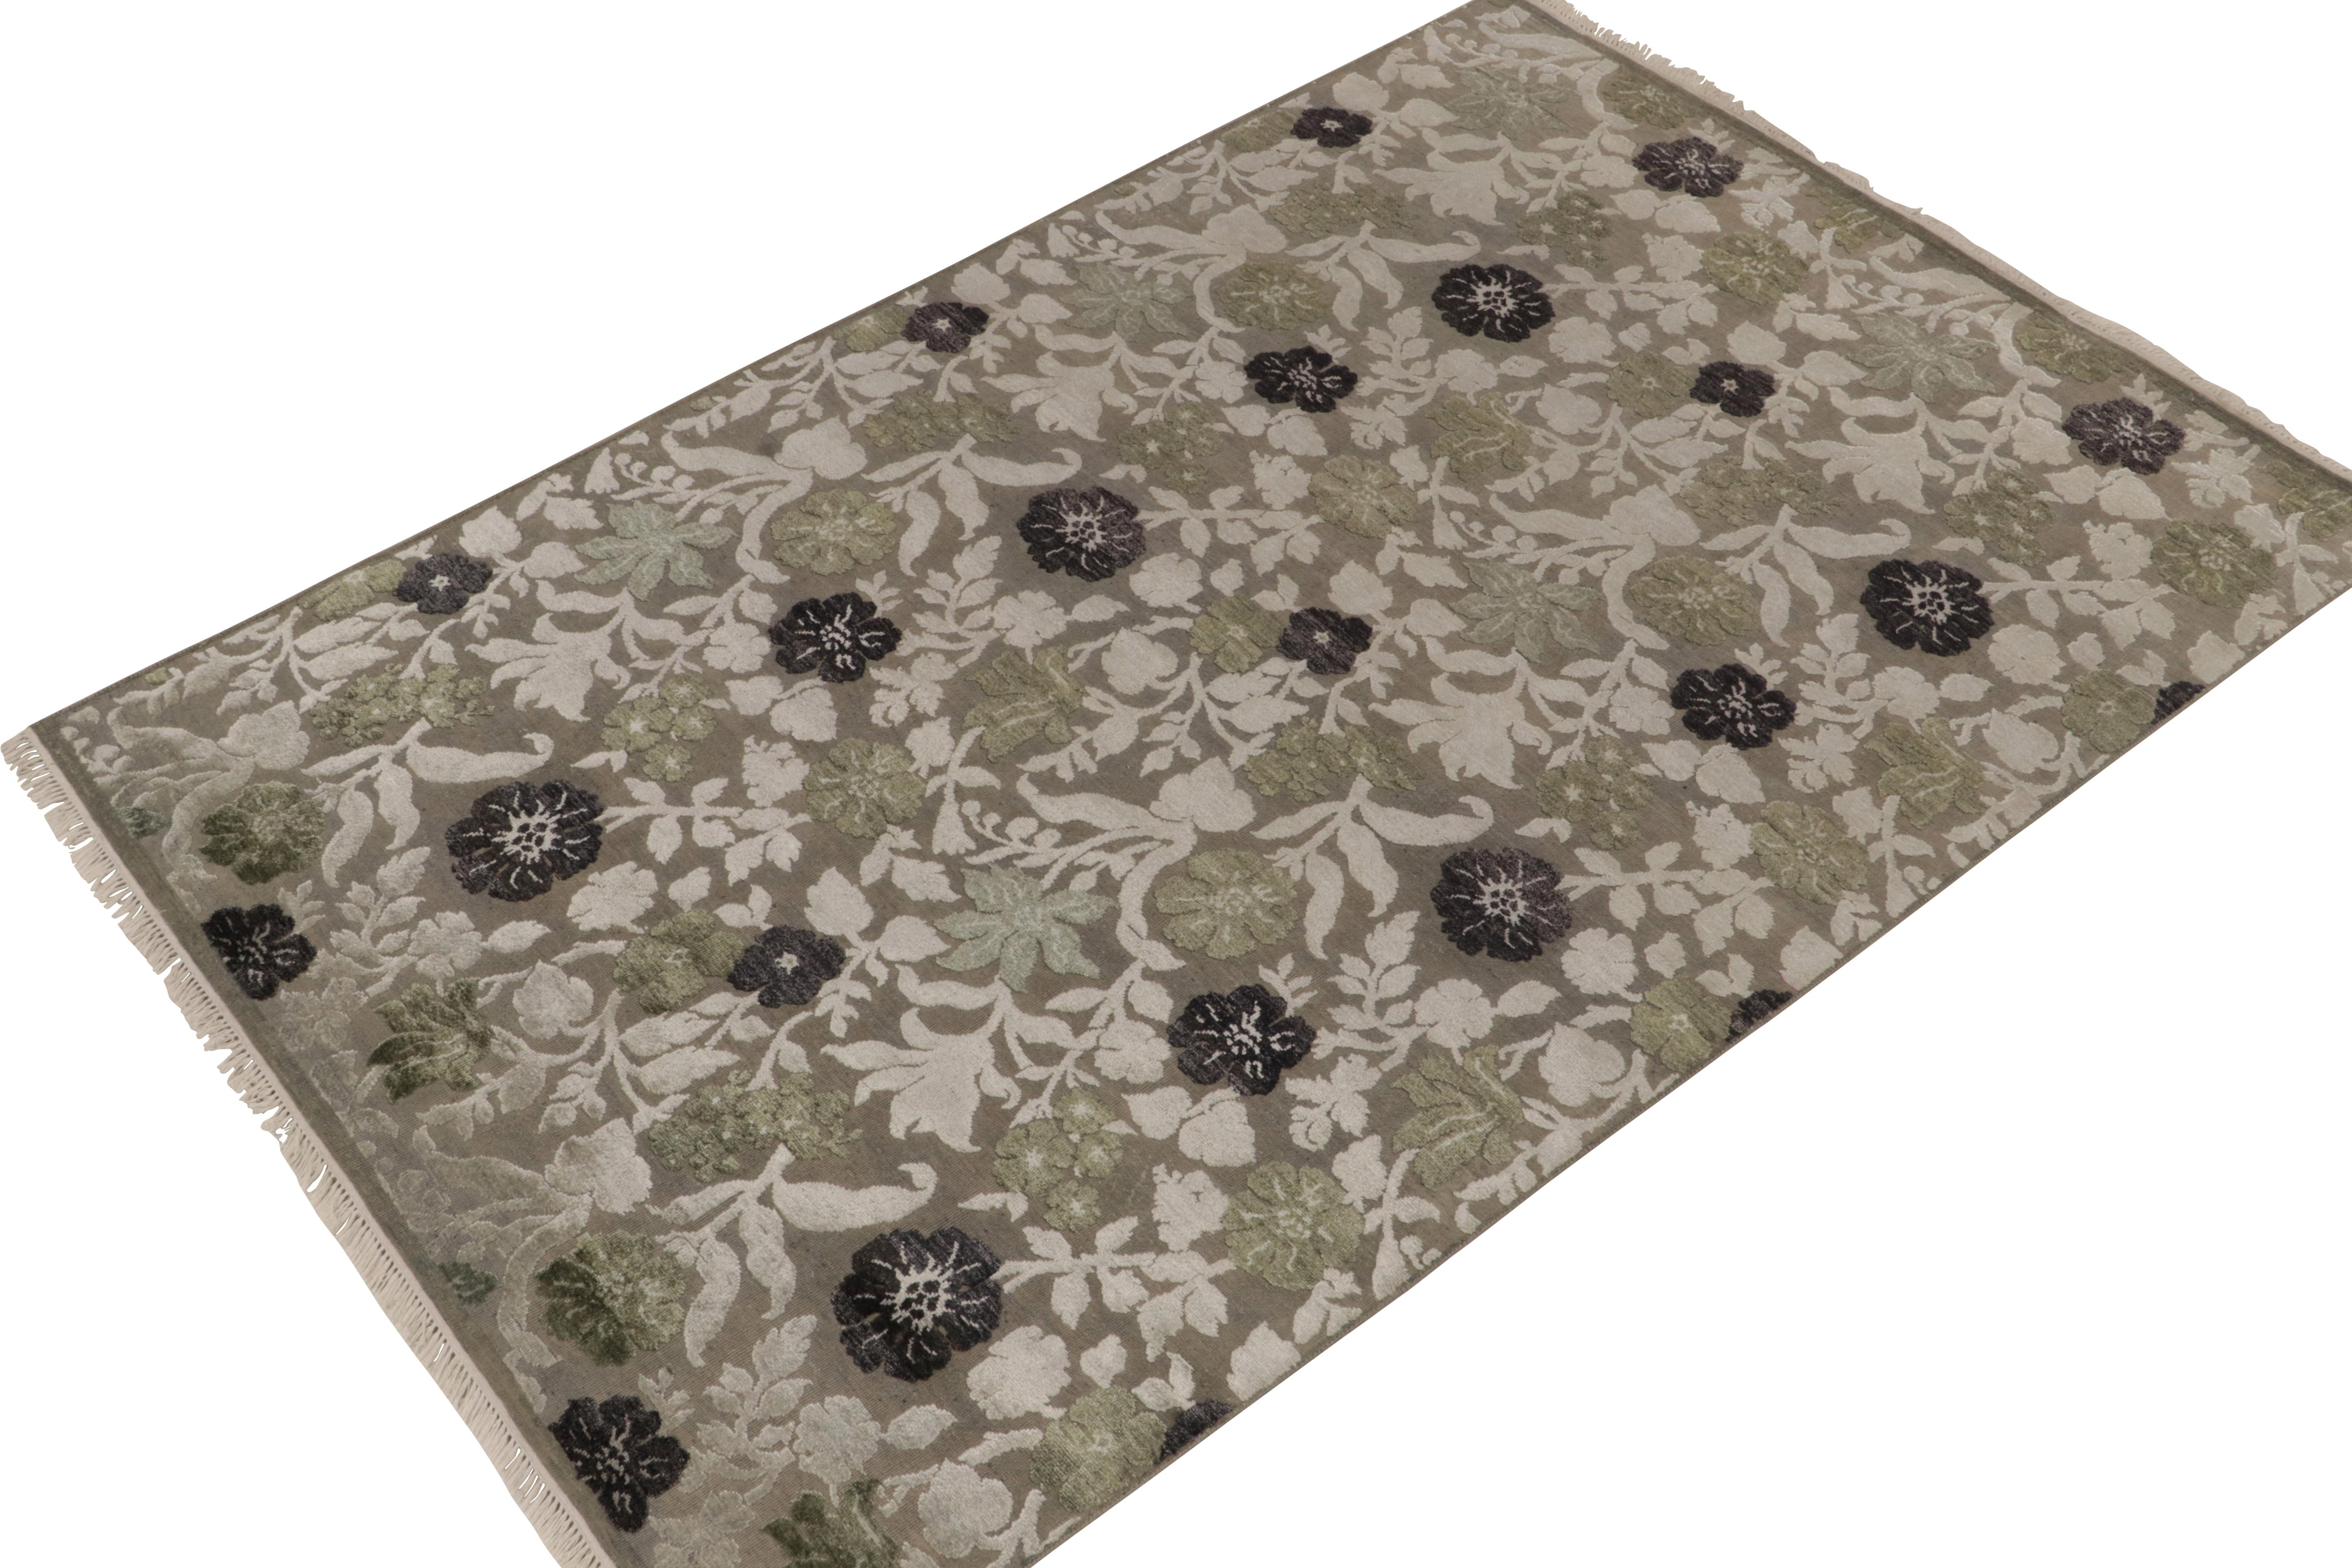 Hand-knotted in a fine blend of wool & silk, this 6x9 contemporary rug from our New & Modern collection is uniquely inspired by classic European styles. Floral patterns in creamy beige, green and black enjoy a high-low textural element of tasteful